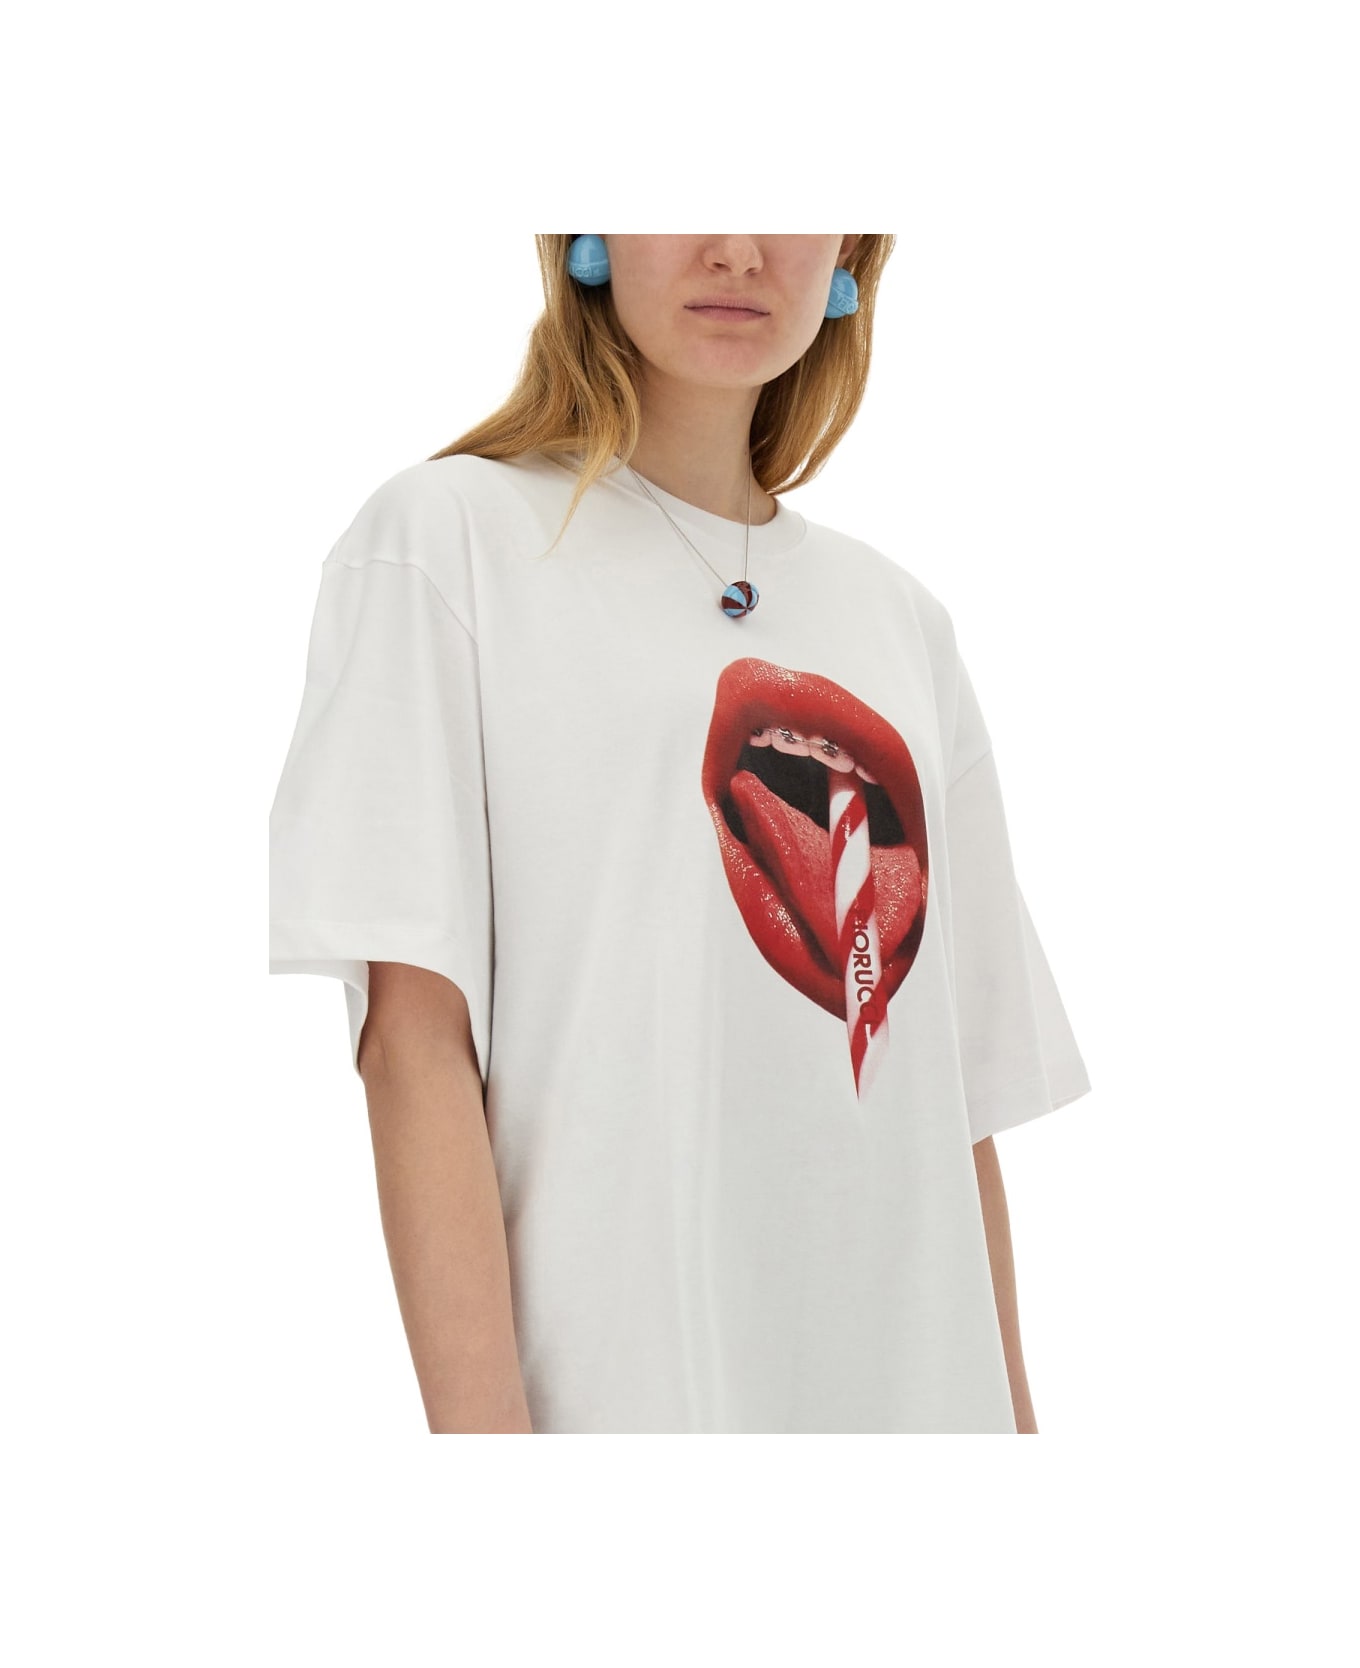 Fiorucci T-shirt With Mouth Print - WHITE Tシャツ